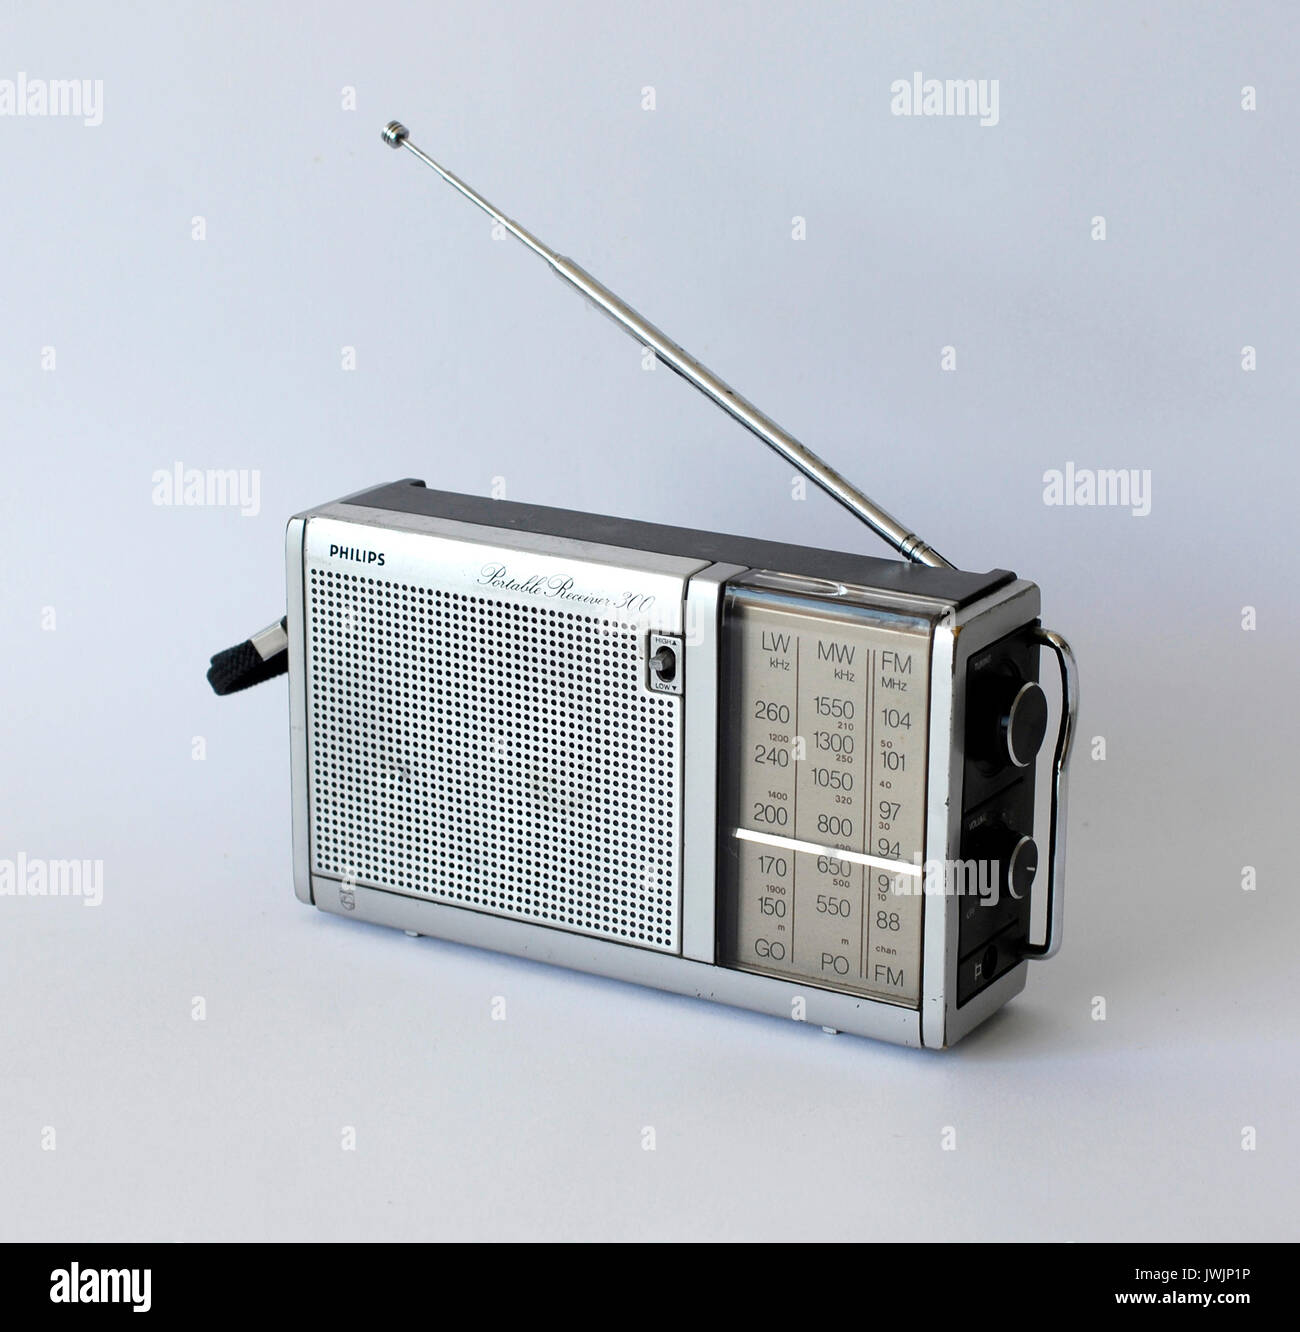 Philips Radio High Resolution Stock Photography and Images - Alamy